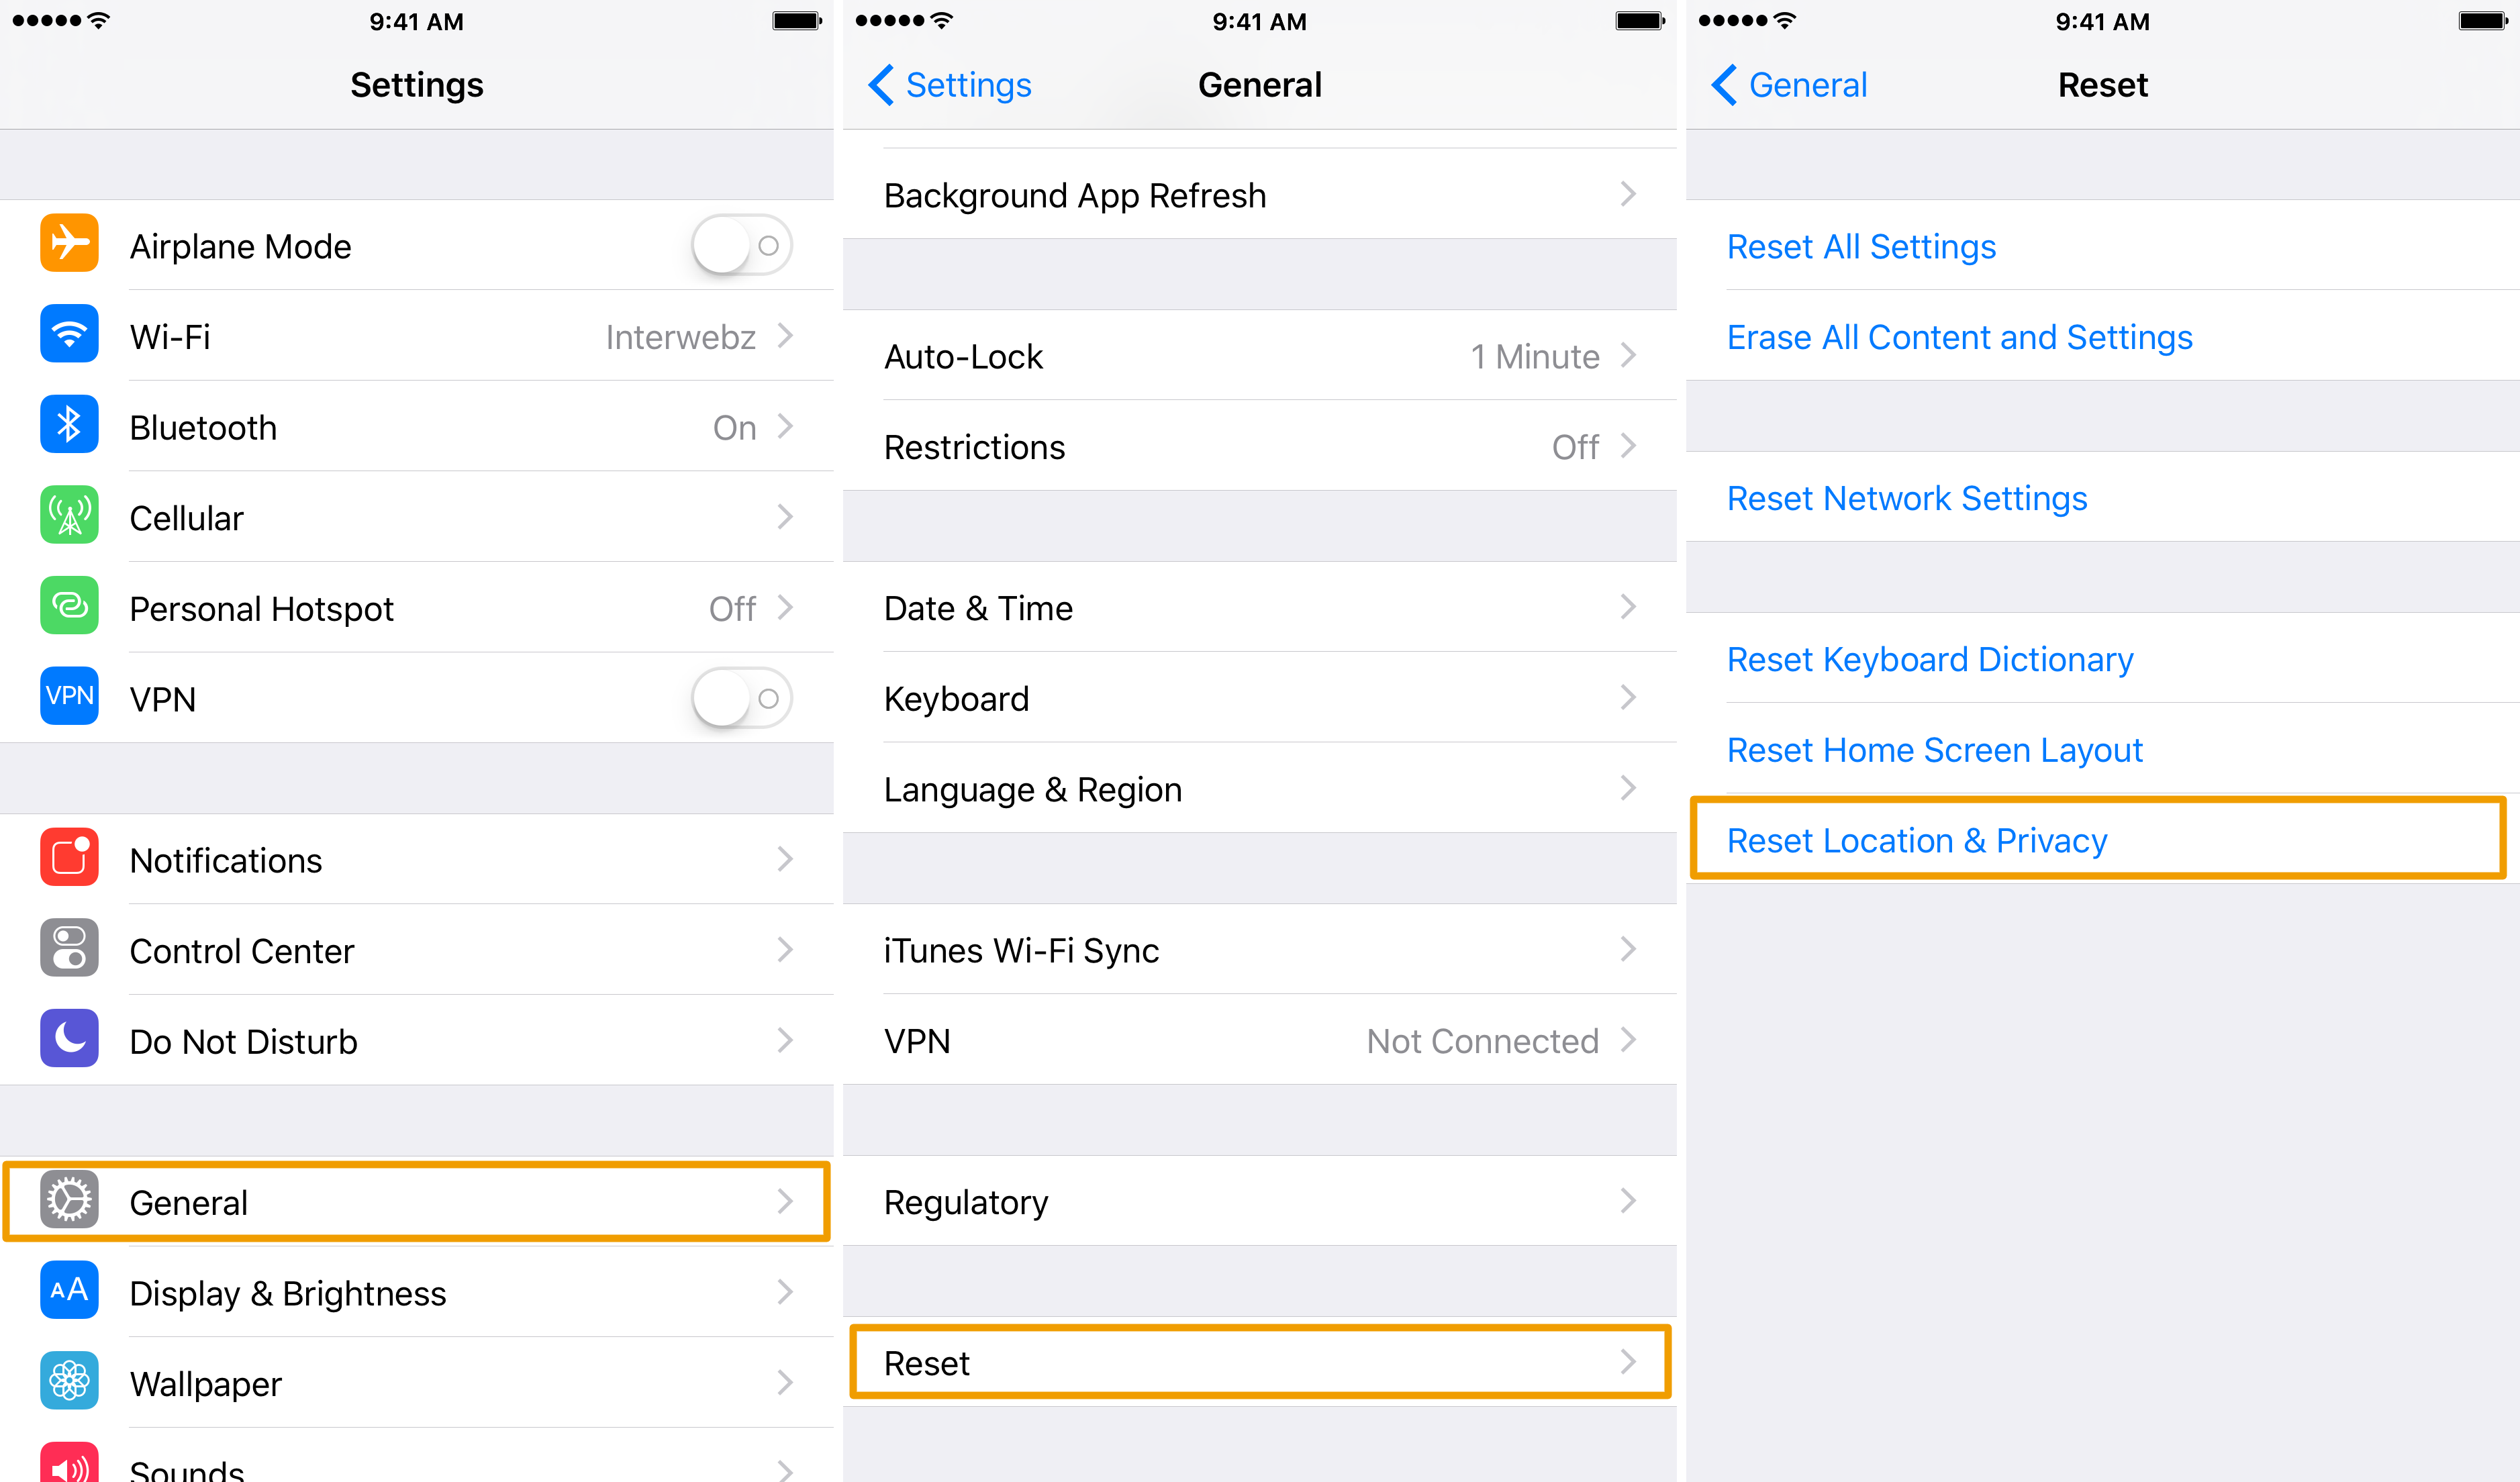 iOS Settings Reset Location & Privacy